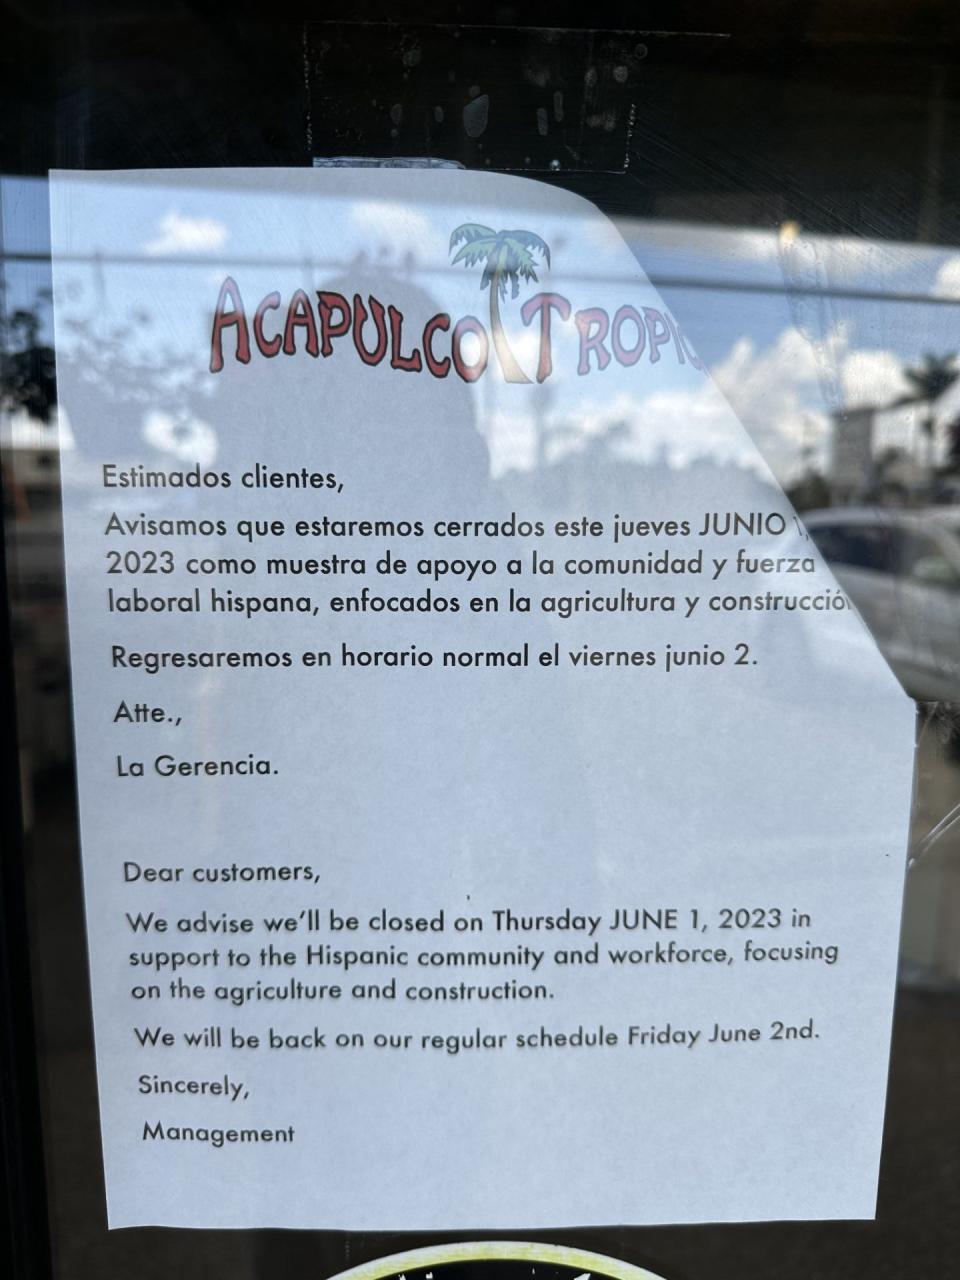 Acapulco Tropical temporarily closed on June 1 in support of Florida's undocumented community.